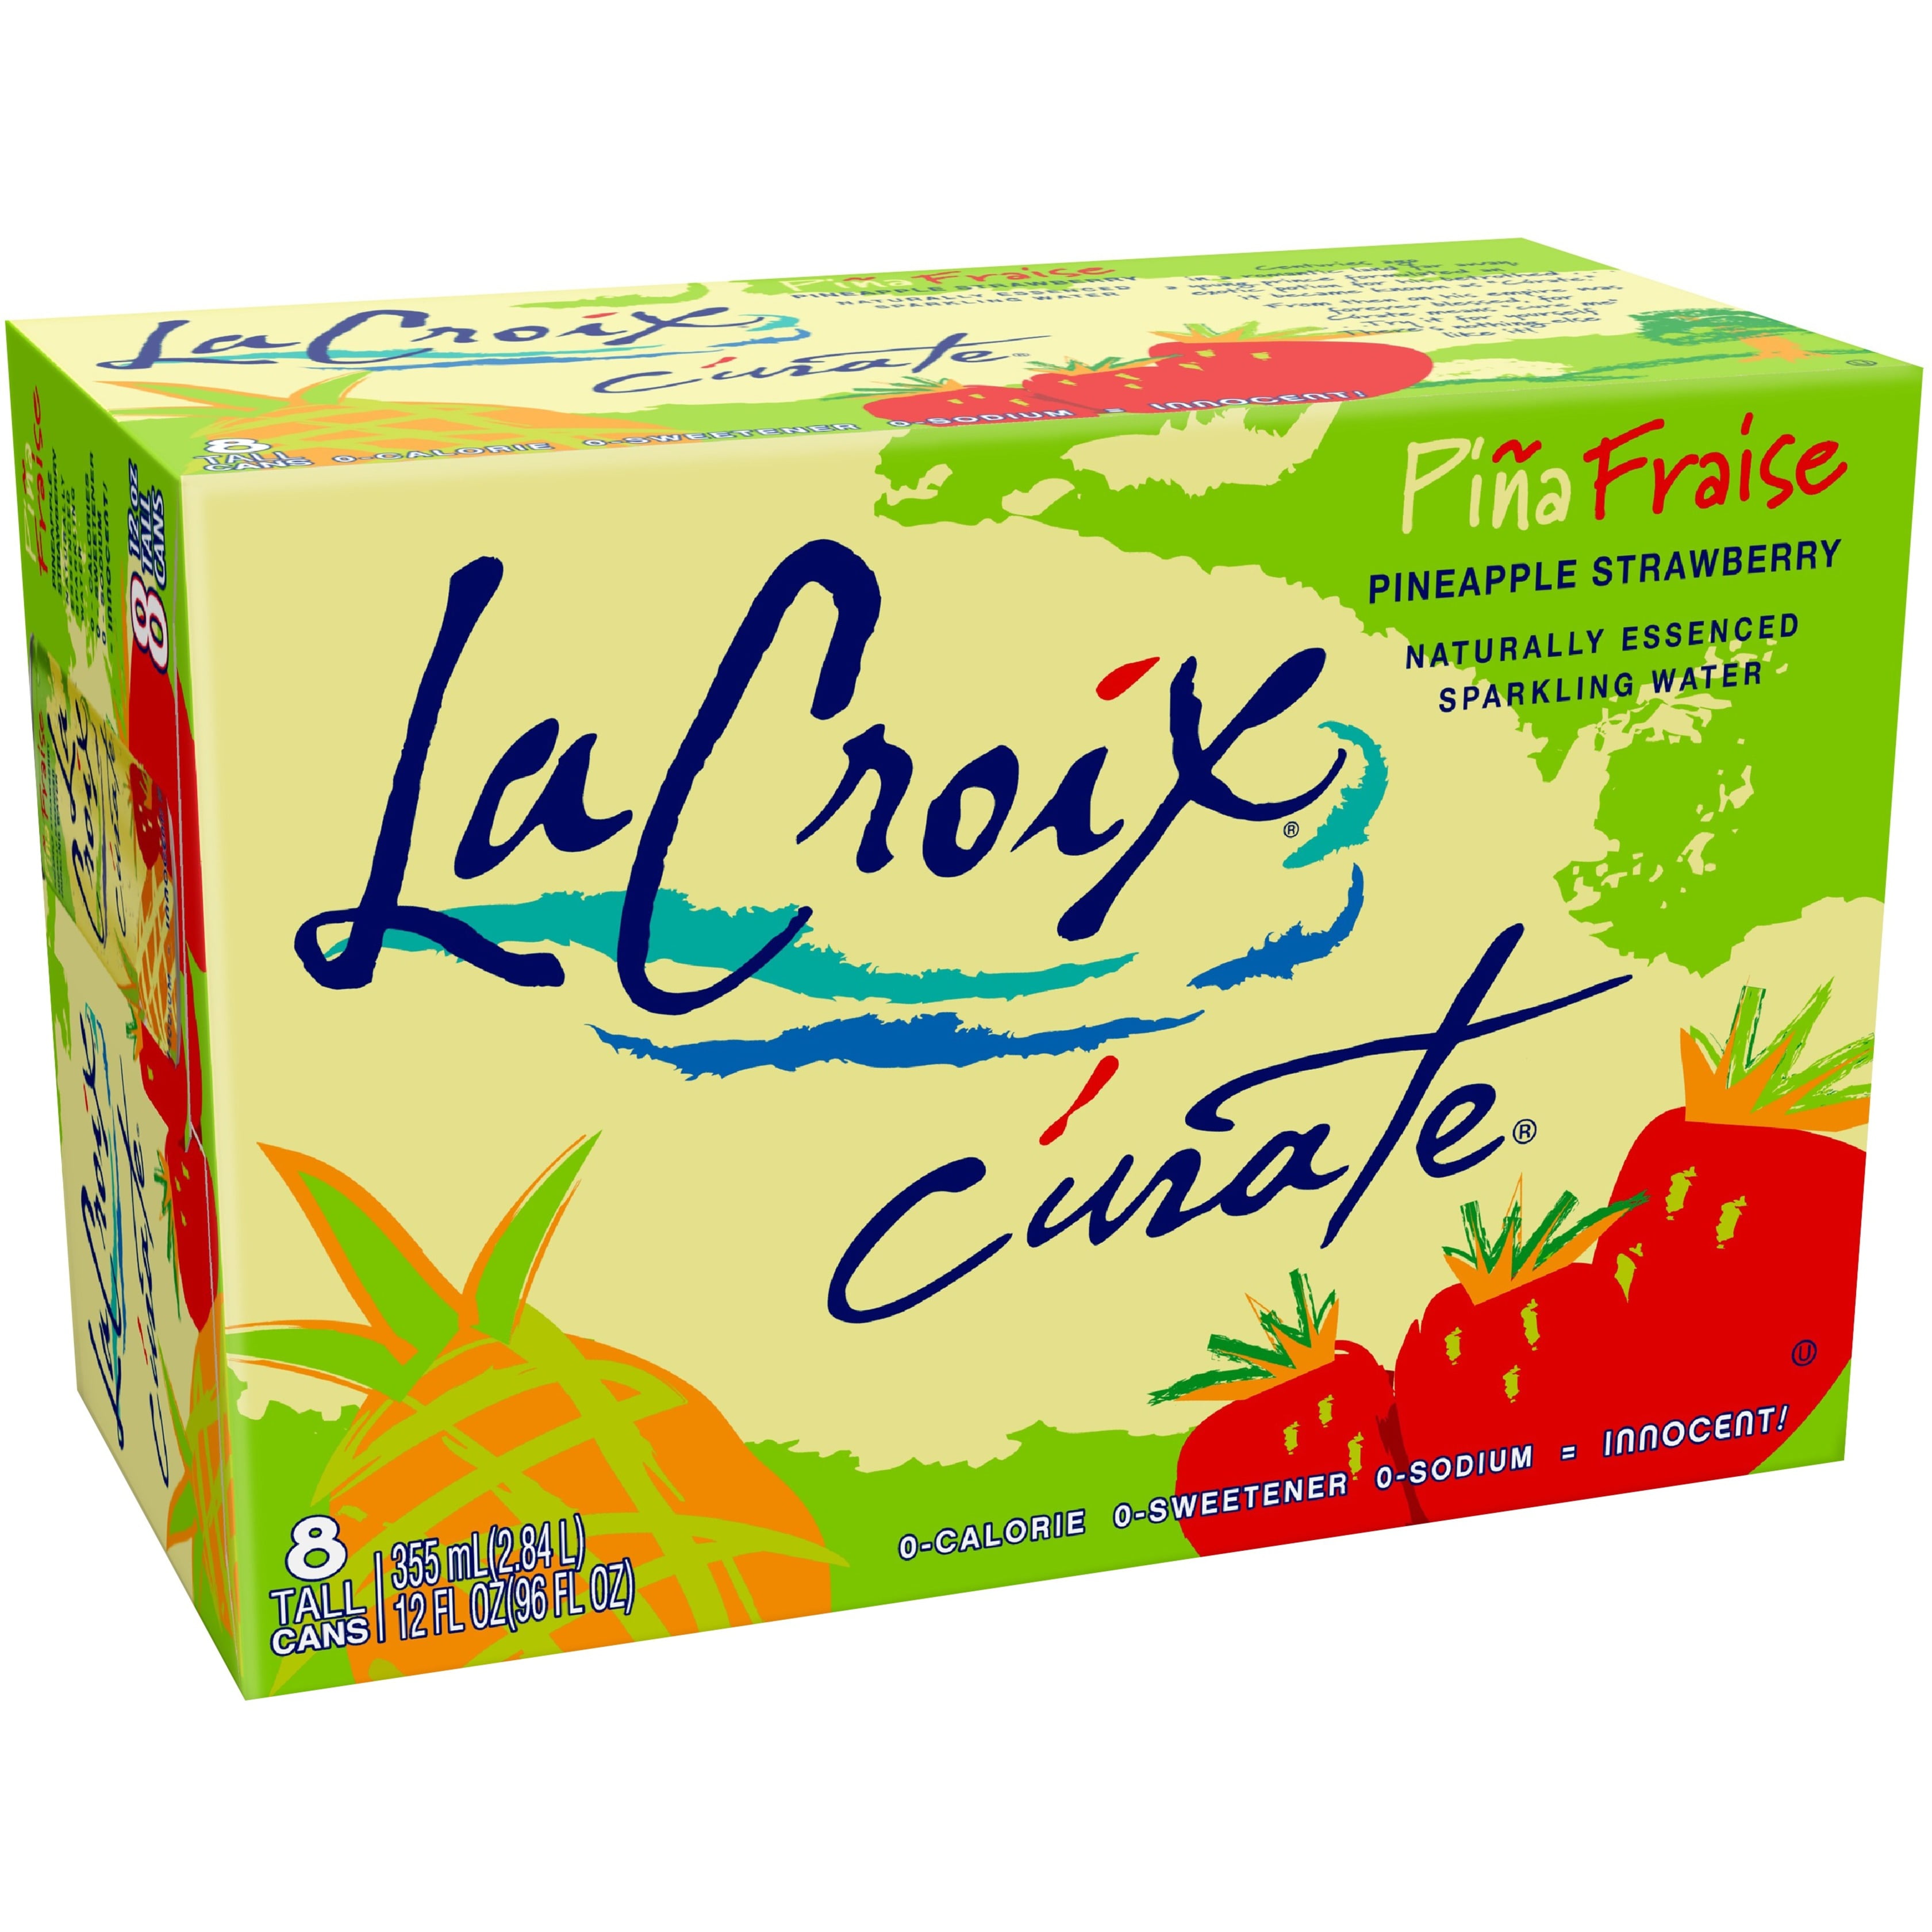 LaCroix Sparkling Water Curate, Pina Fraise (Pineapple Strawberry) 8pk/12 fl Oz